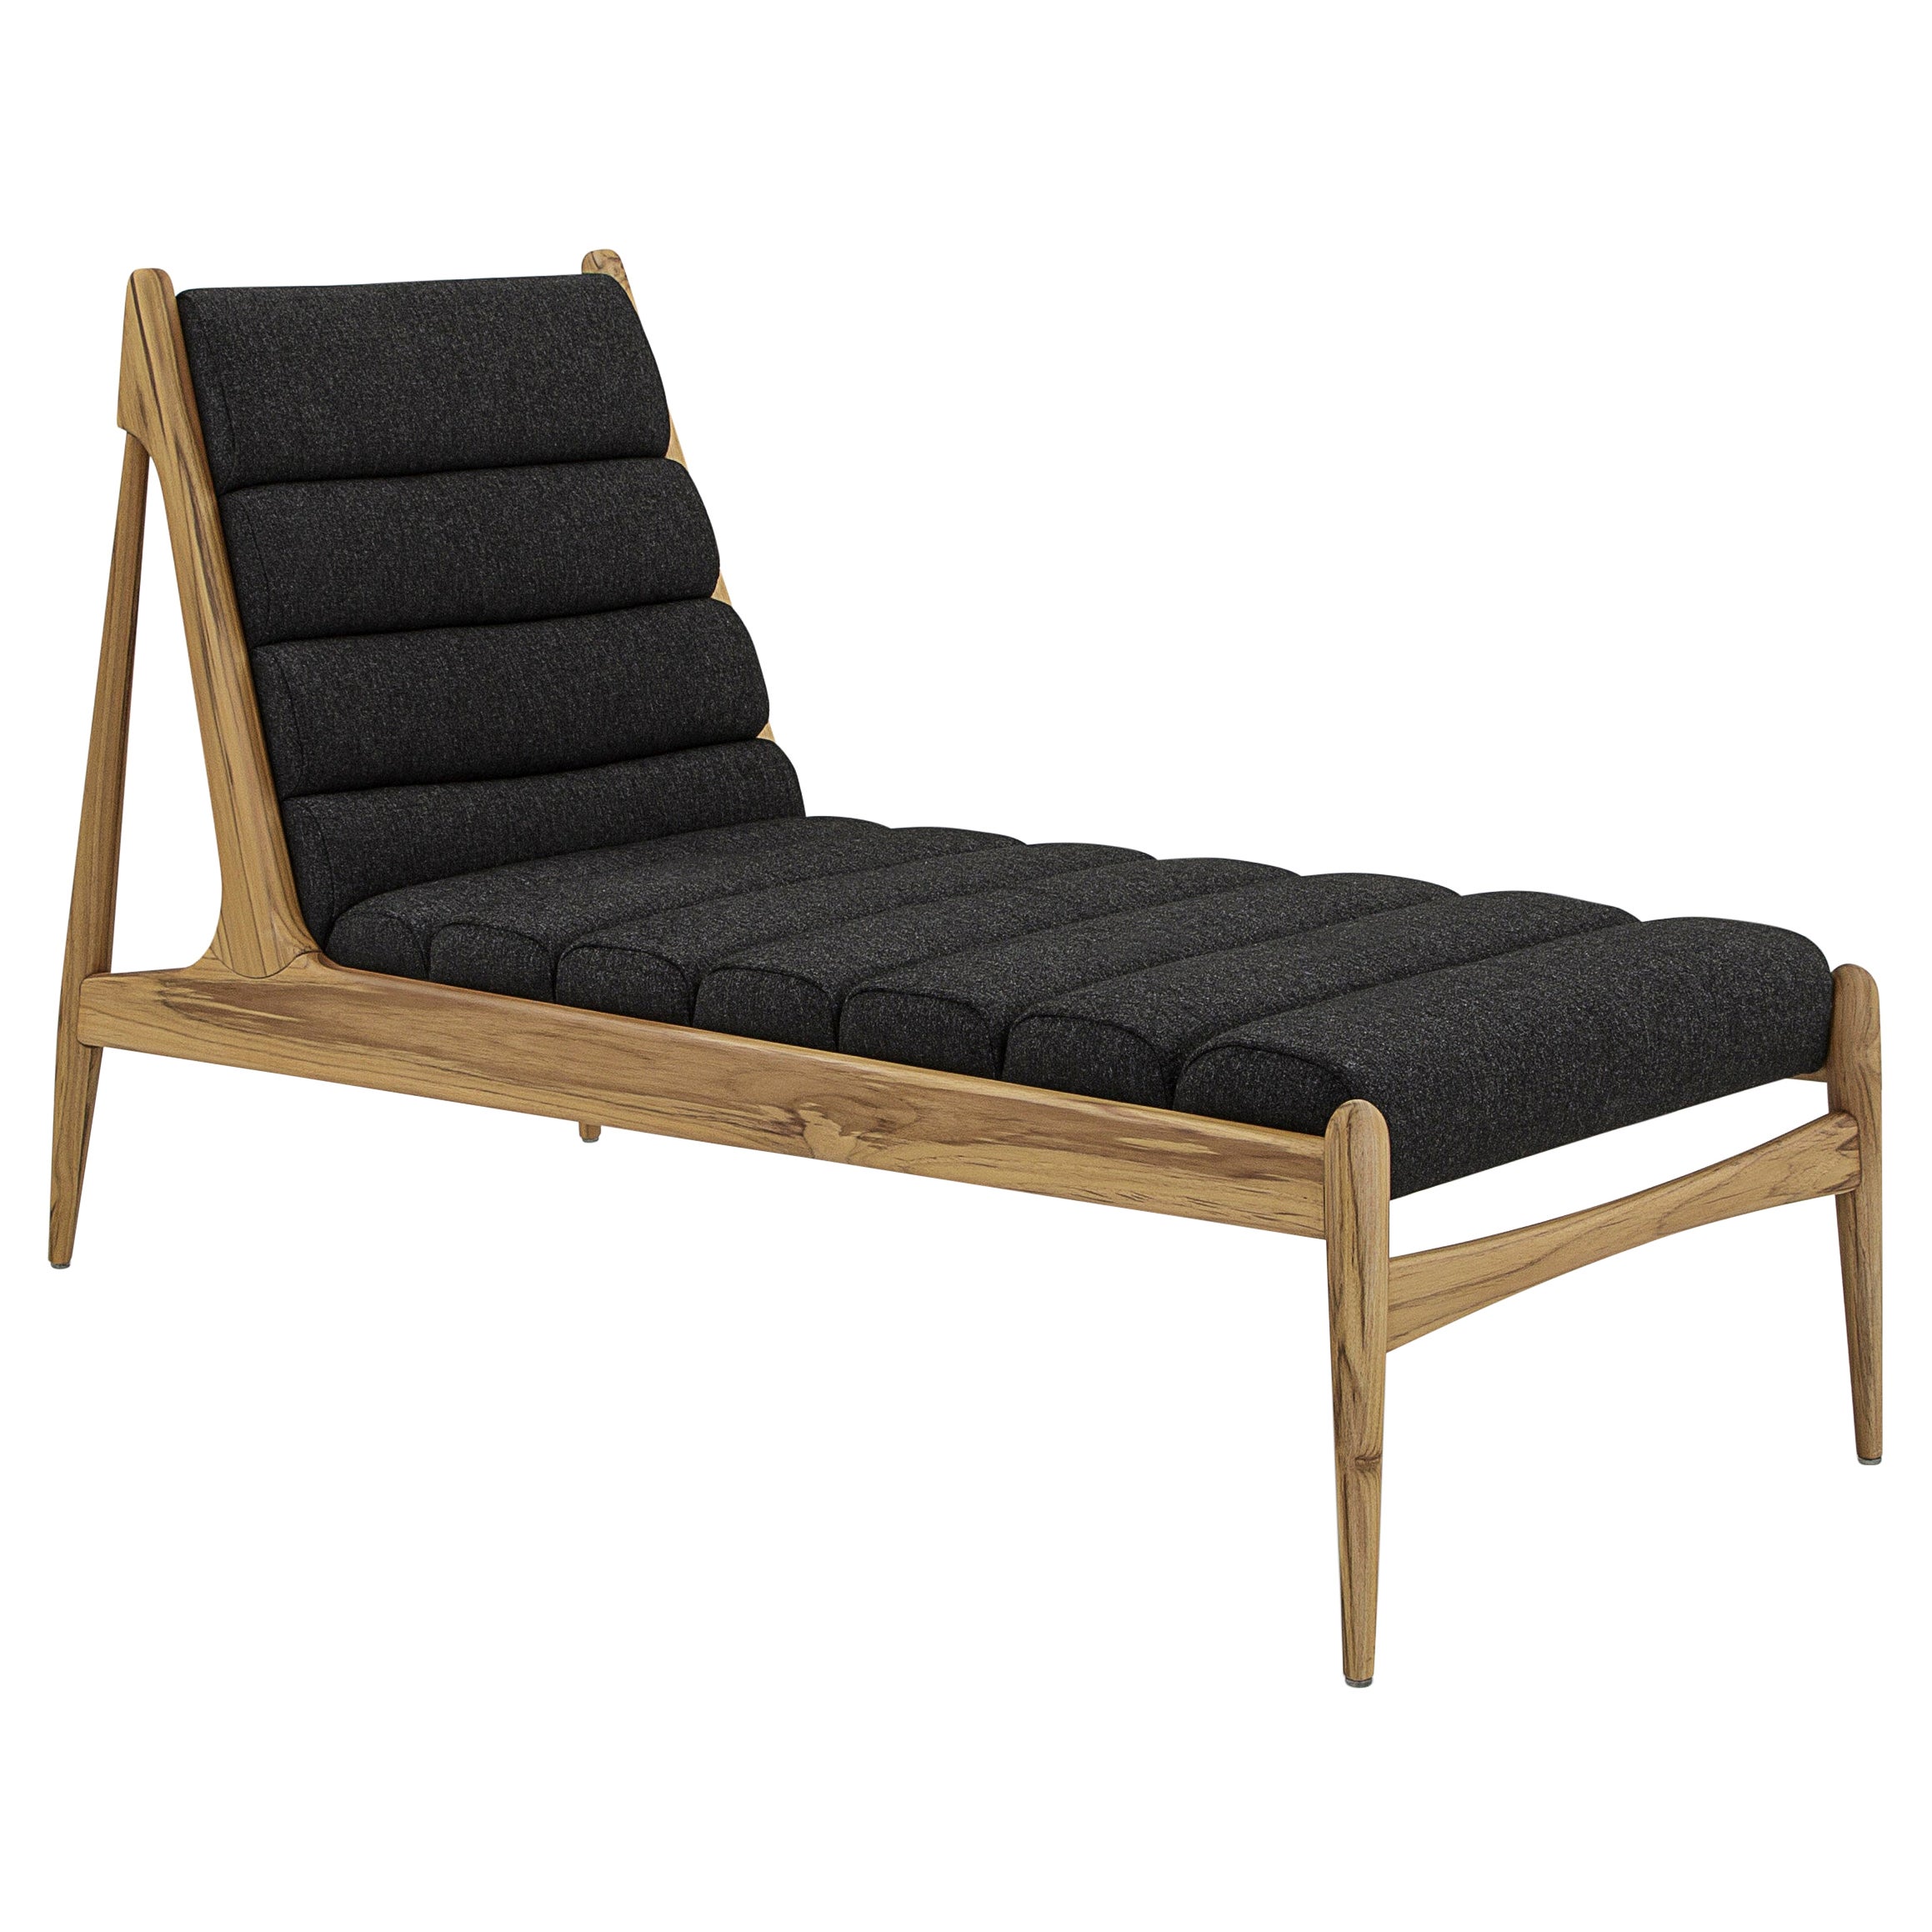 Wave Chaise in Teak Wood Finish and Black Fabric